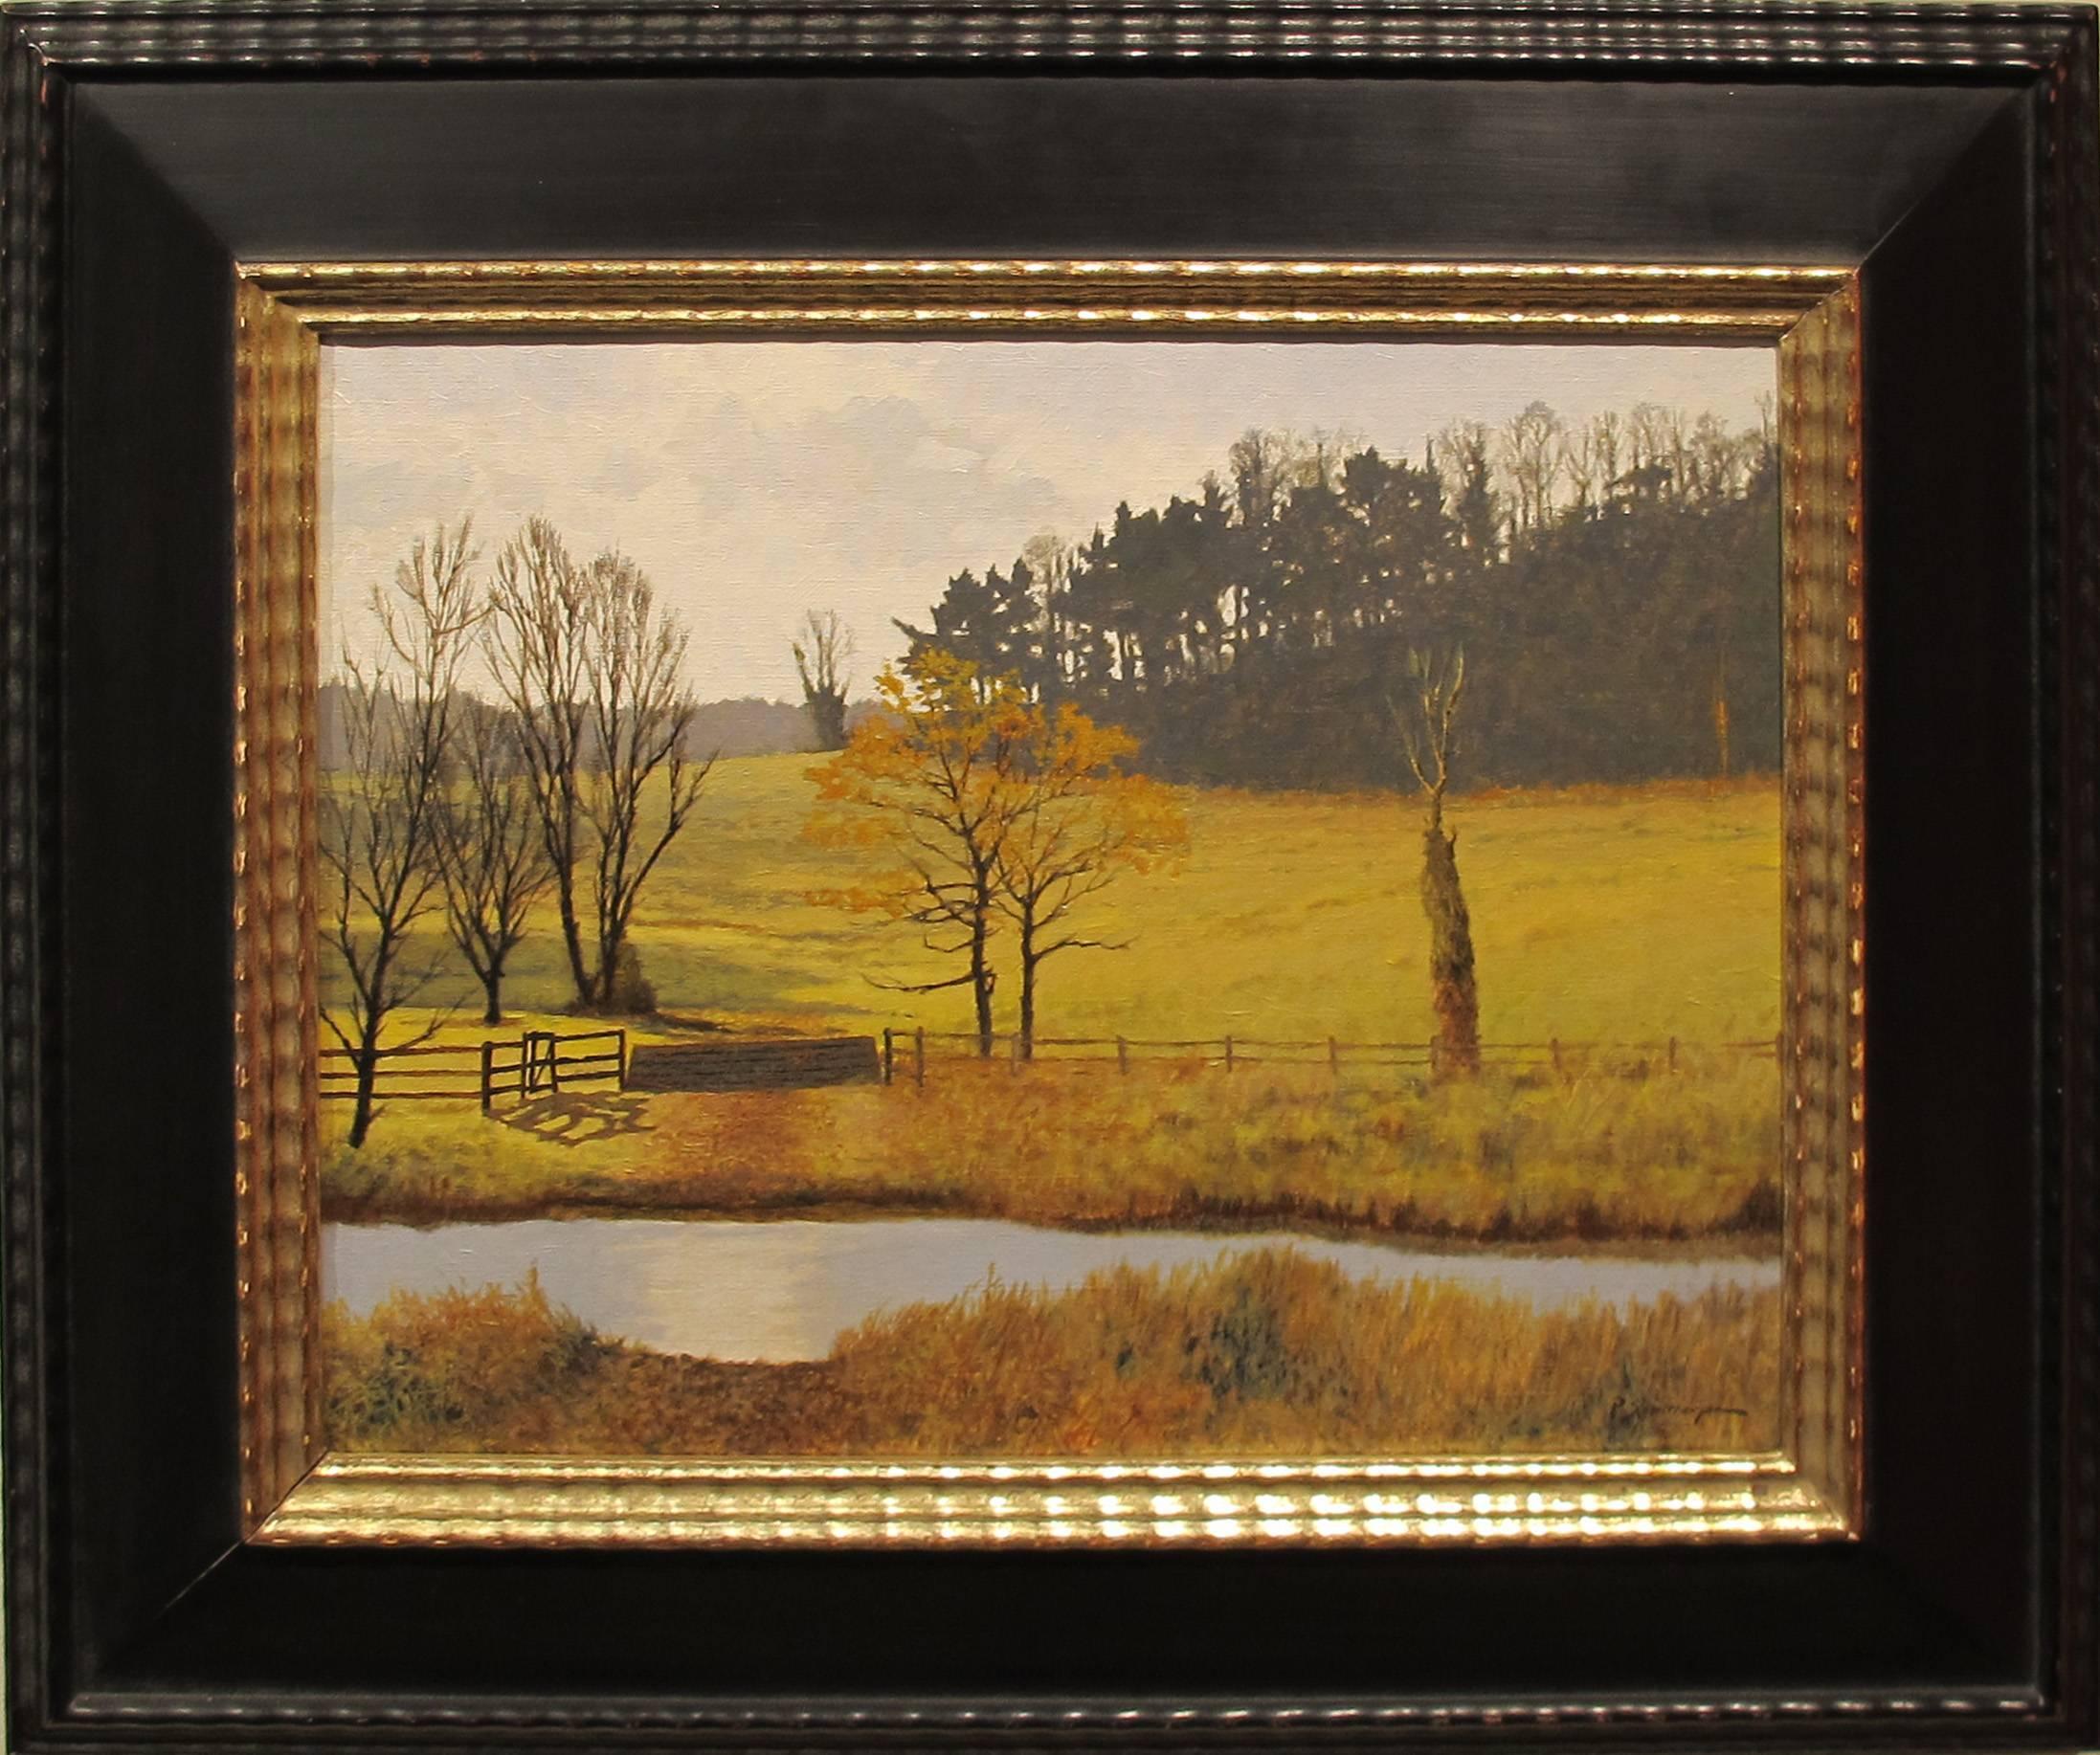 Peter Sculthorpe Landscape Painting - "Water Crossing"